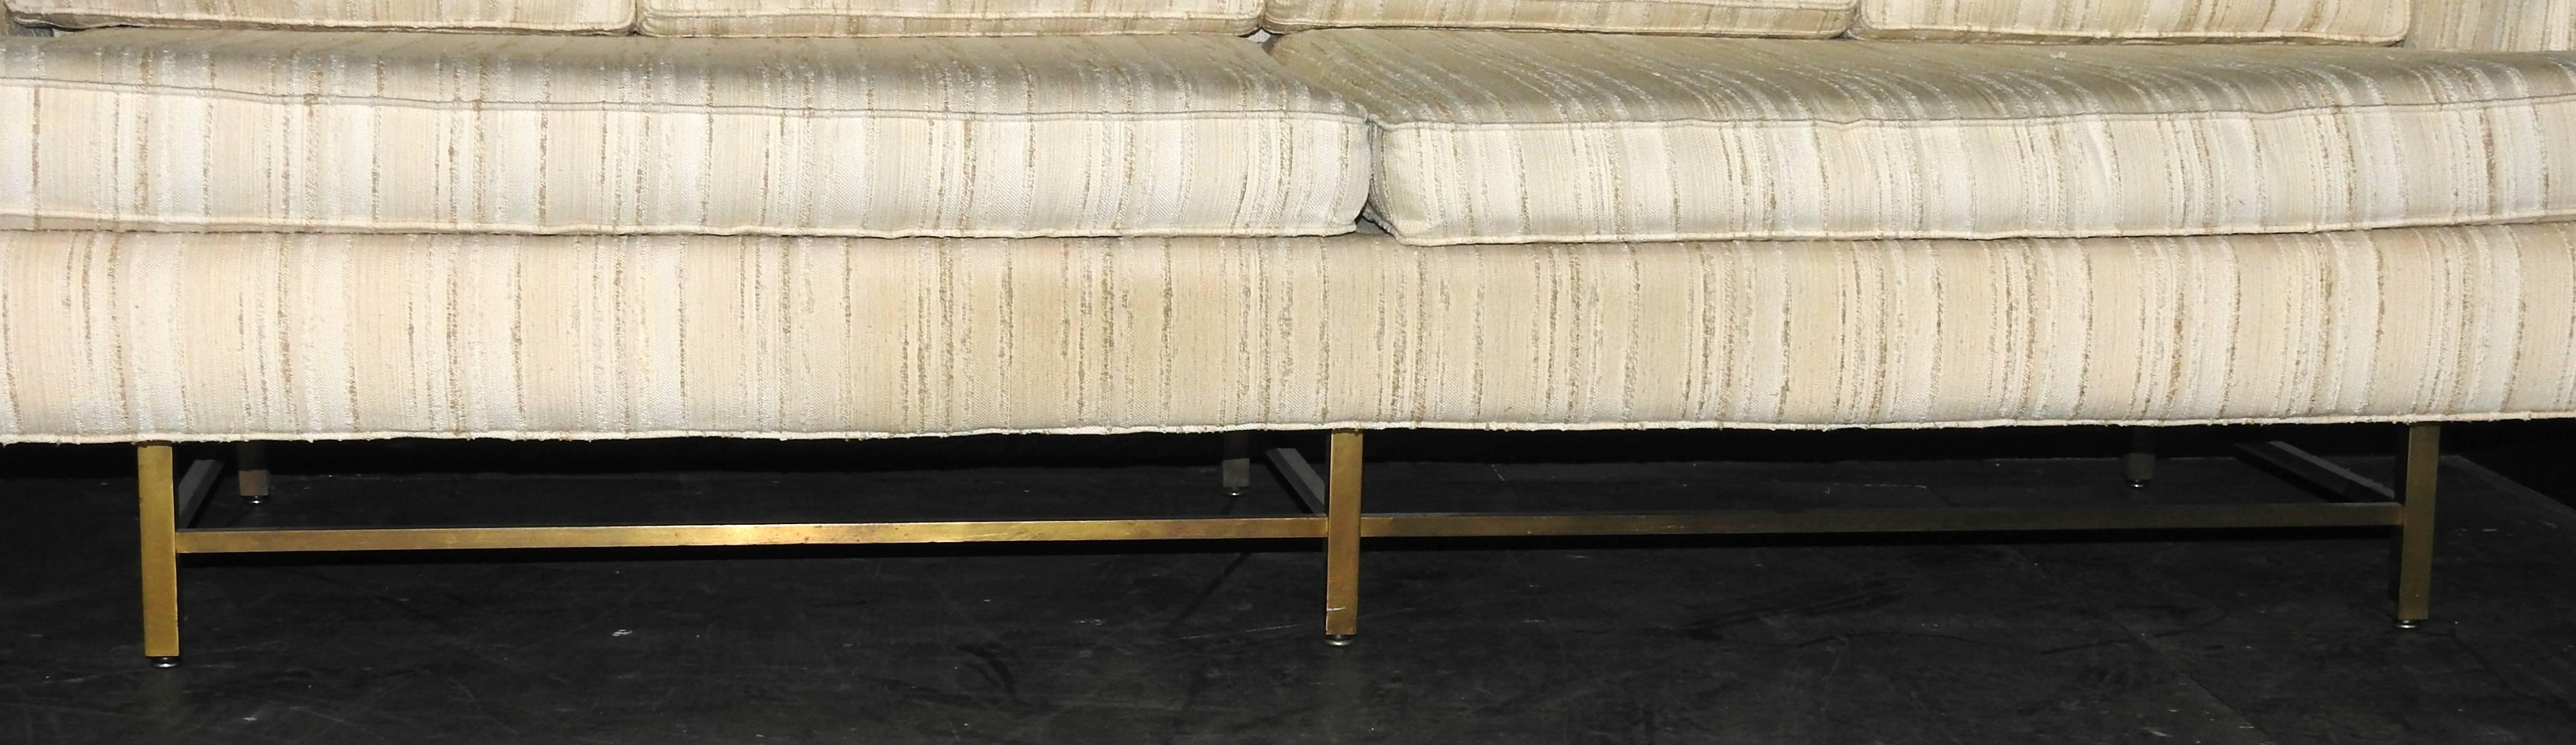 Outstanding Mid-Century Modern Couch by John Stuart In Good Condition For Sale In Philadelphia, PA